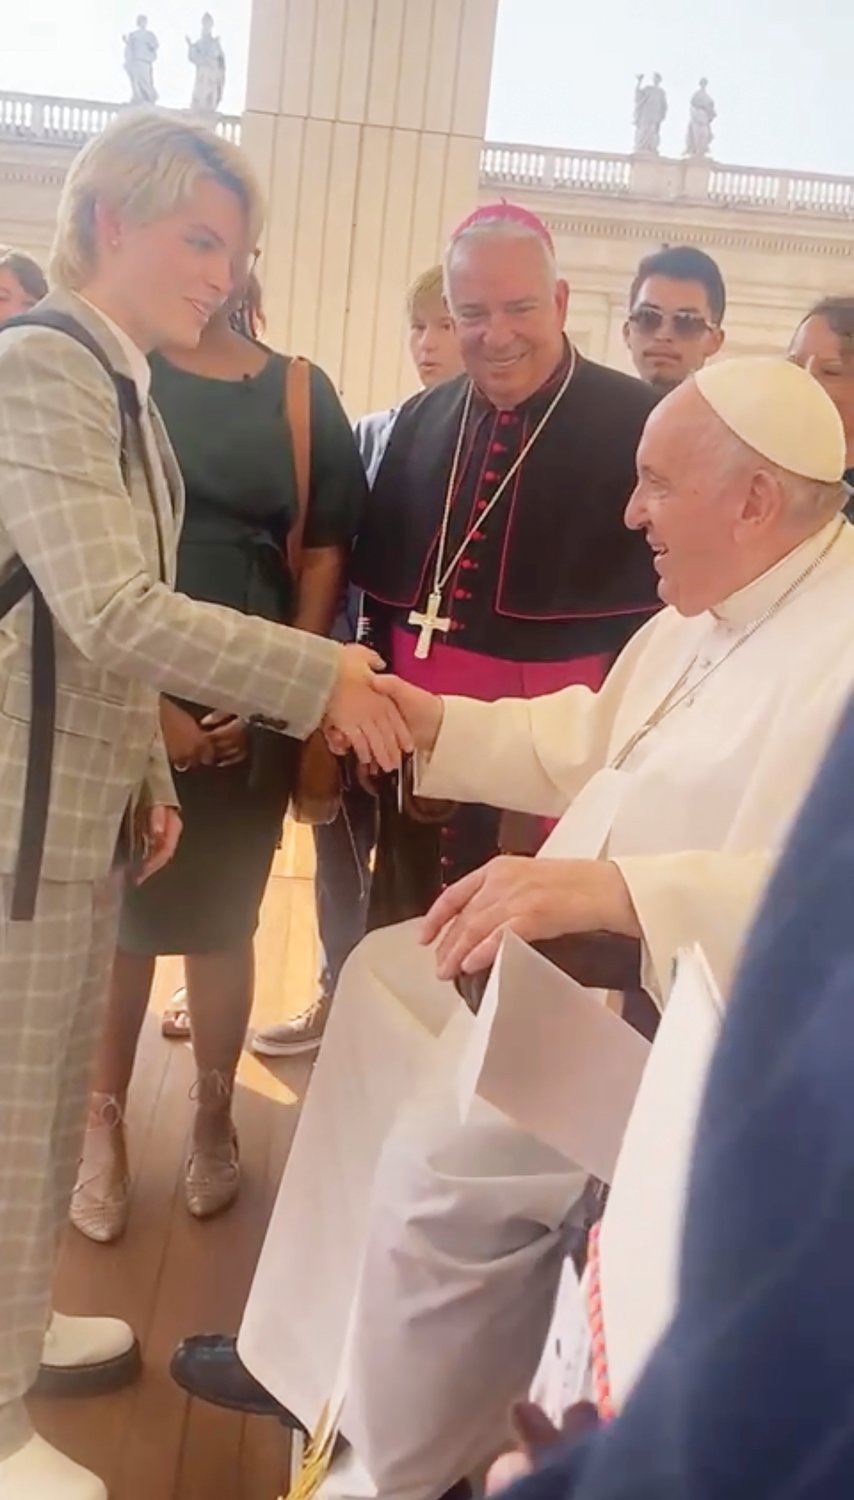 Olivia Marcoux meets Pope Francis during a visit on October 12 in St. Peter’s Square. She has served as a Mother of Hope Camp counselor, is a member of the Diocesan Leadership Team, teaches faith formation at her parish and is on her school’s campus ministry. Having been named to the National Youth Advisory Council on August 1, she will serve on the council through July 31, 2024.